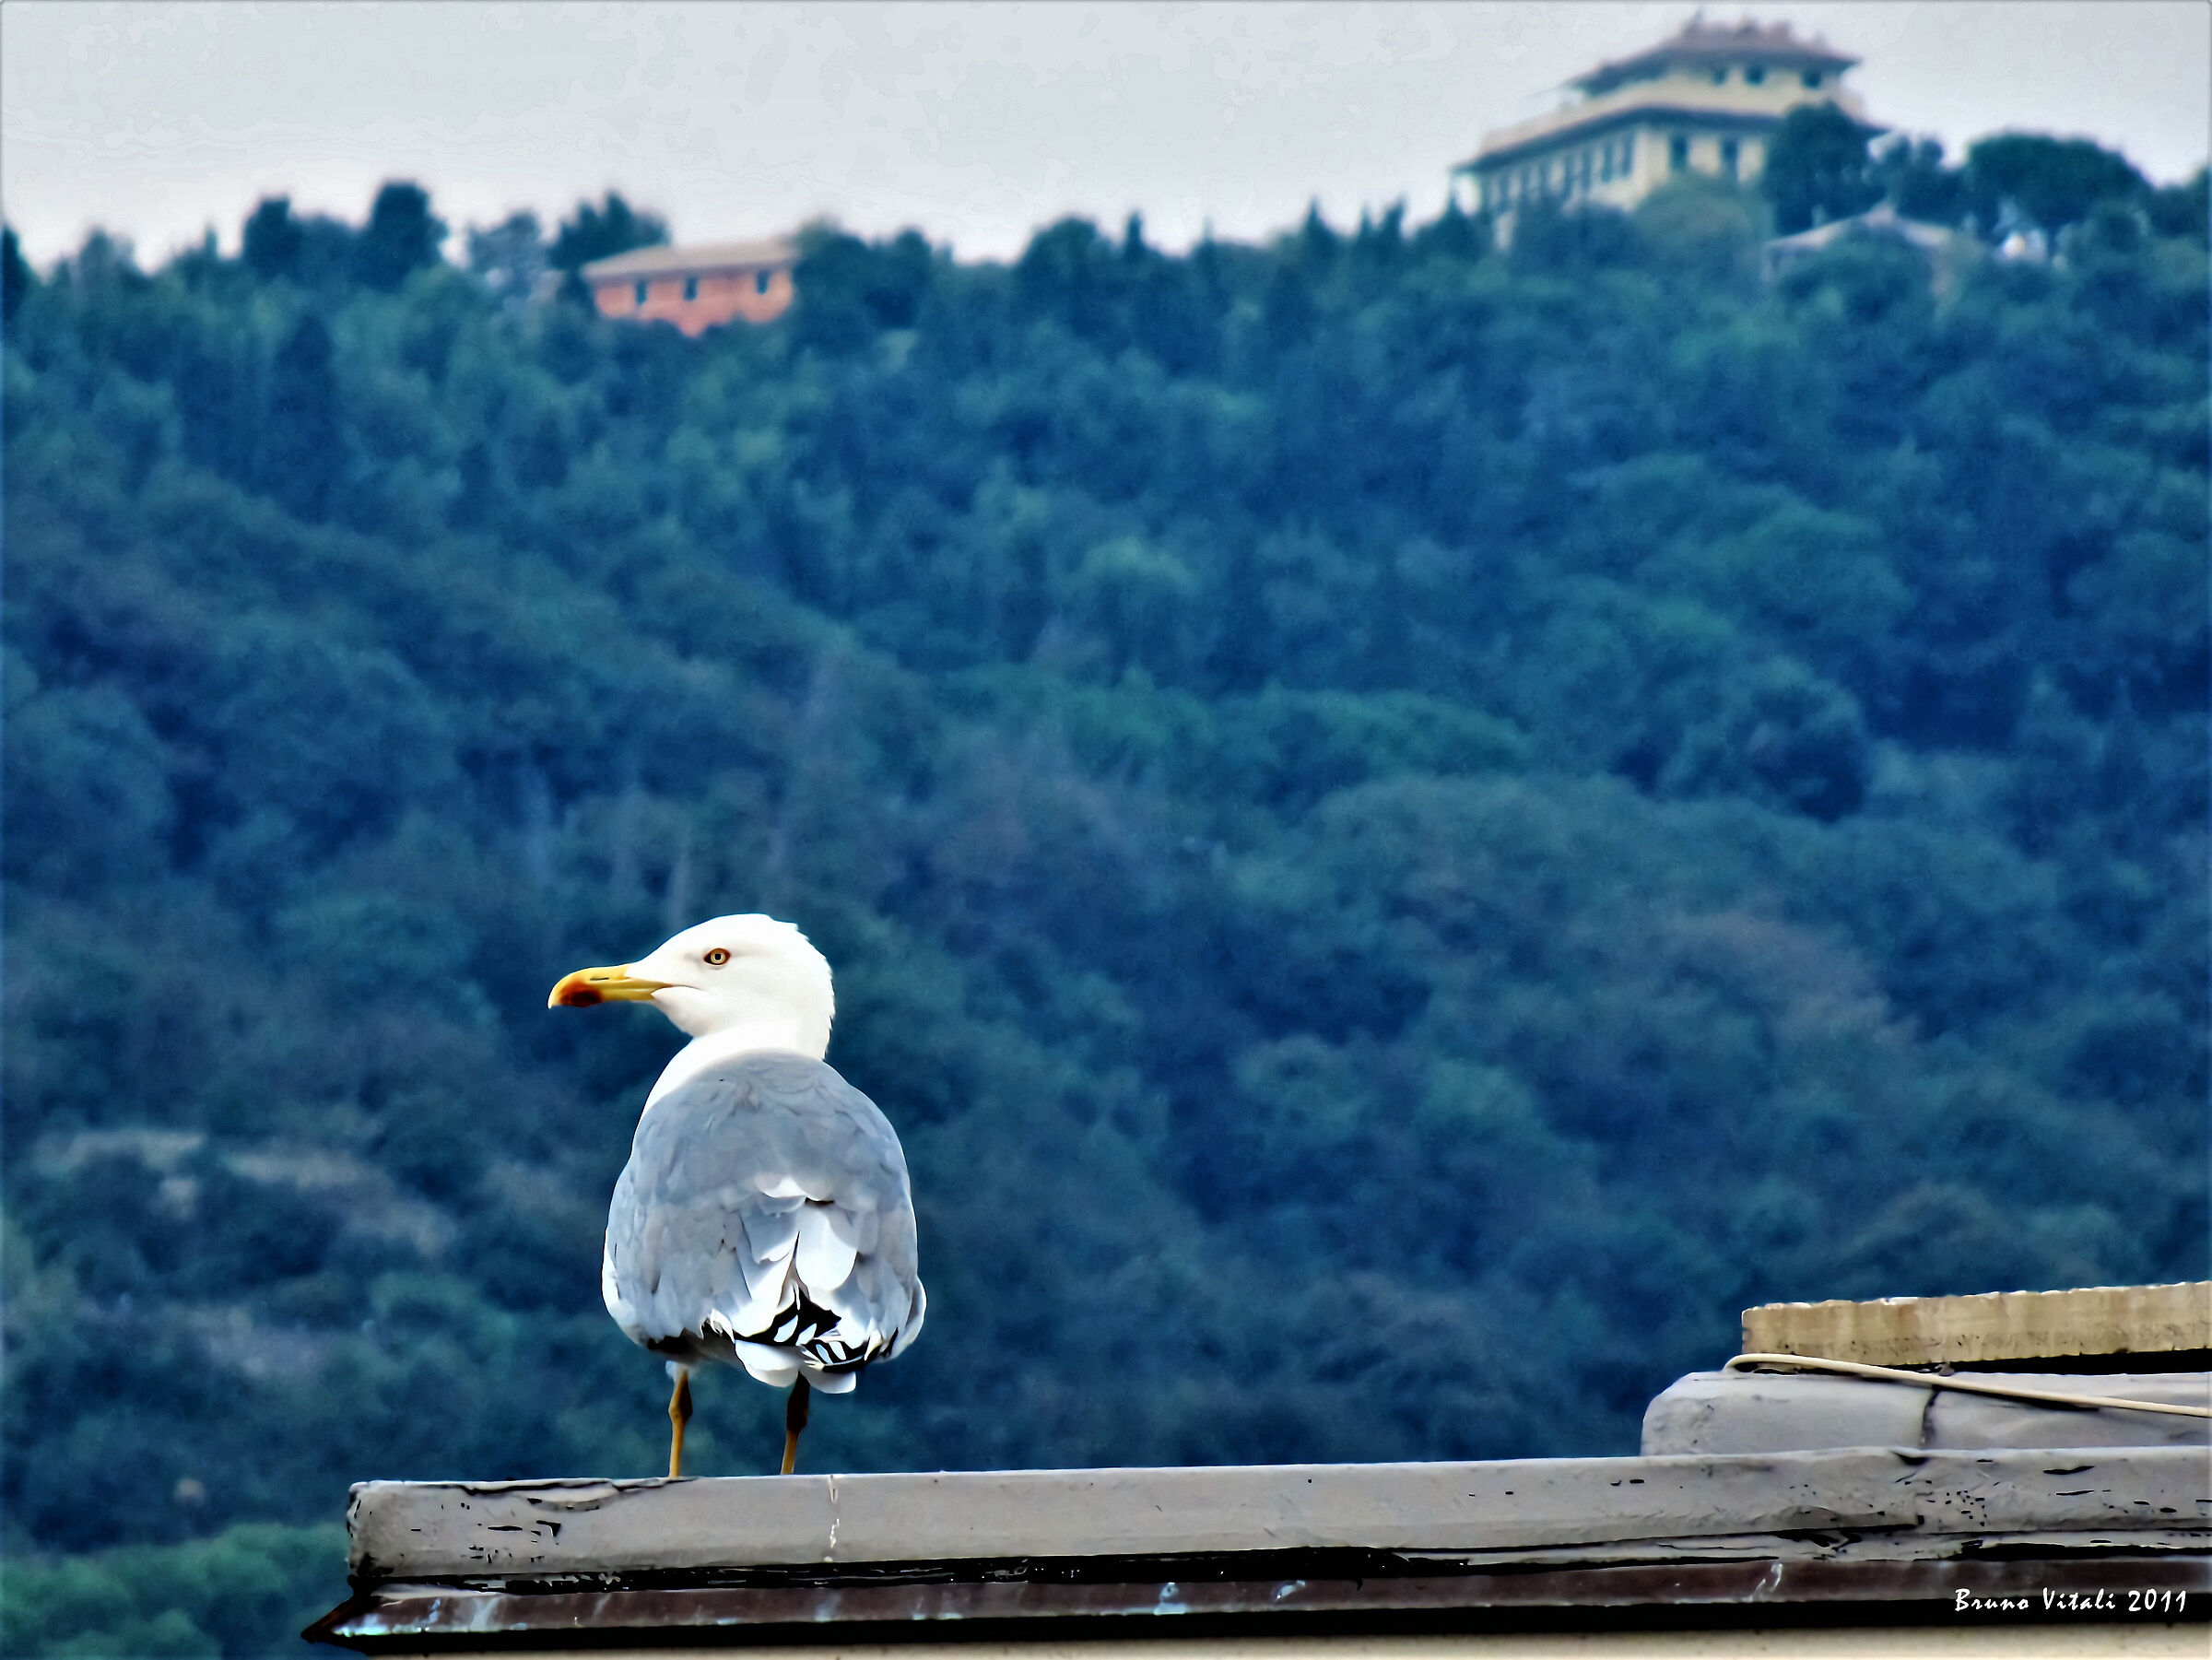 The seagull on the roof...